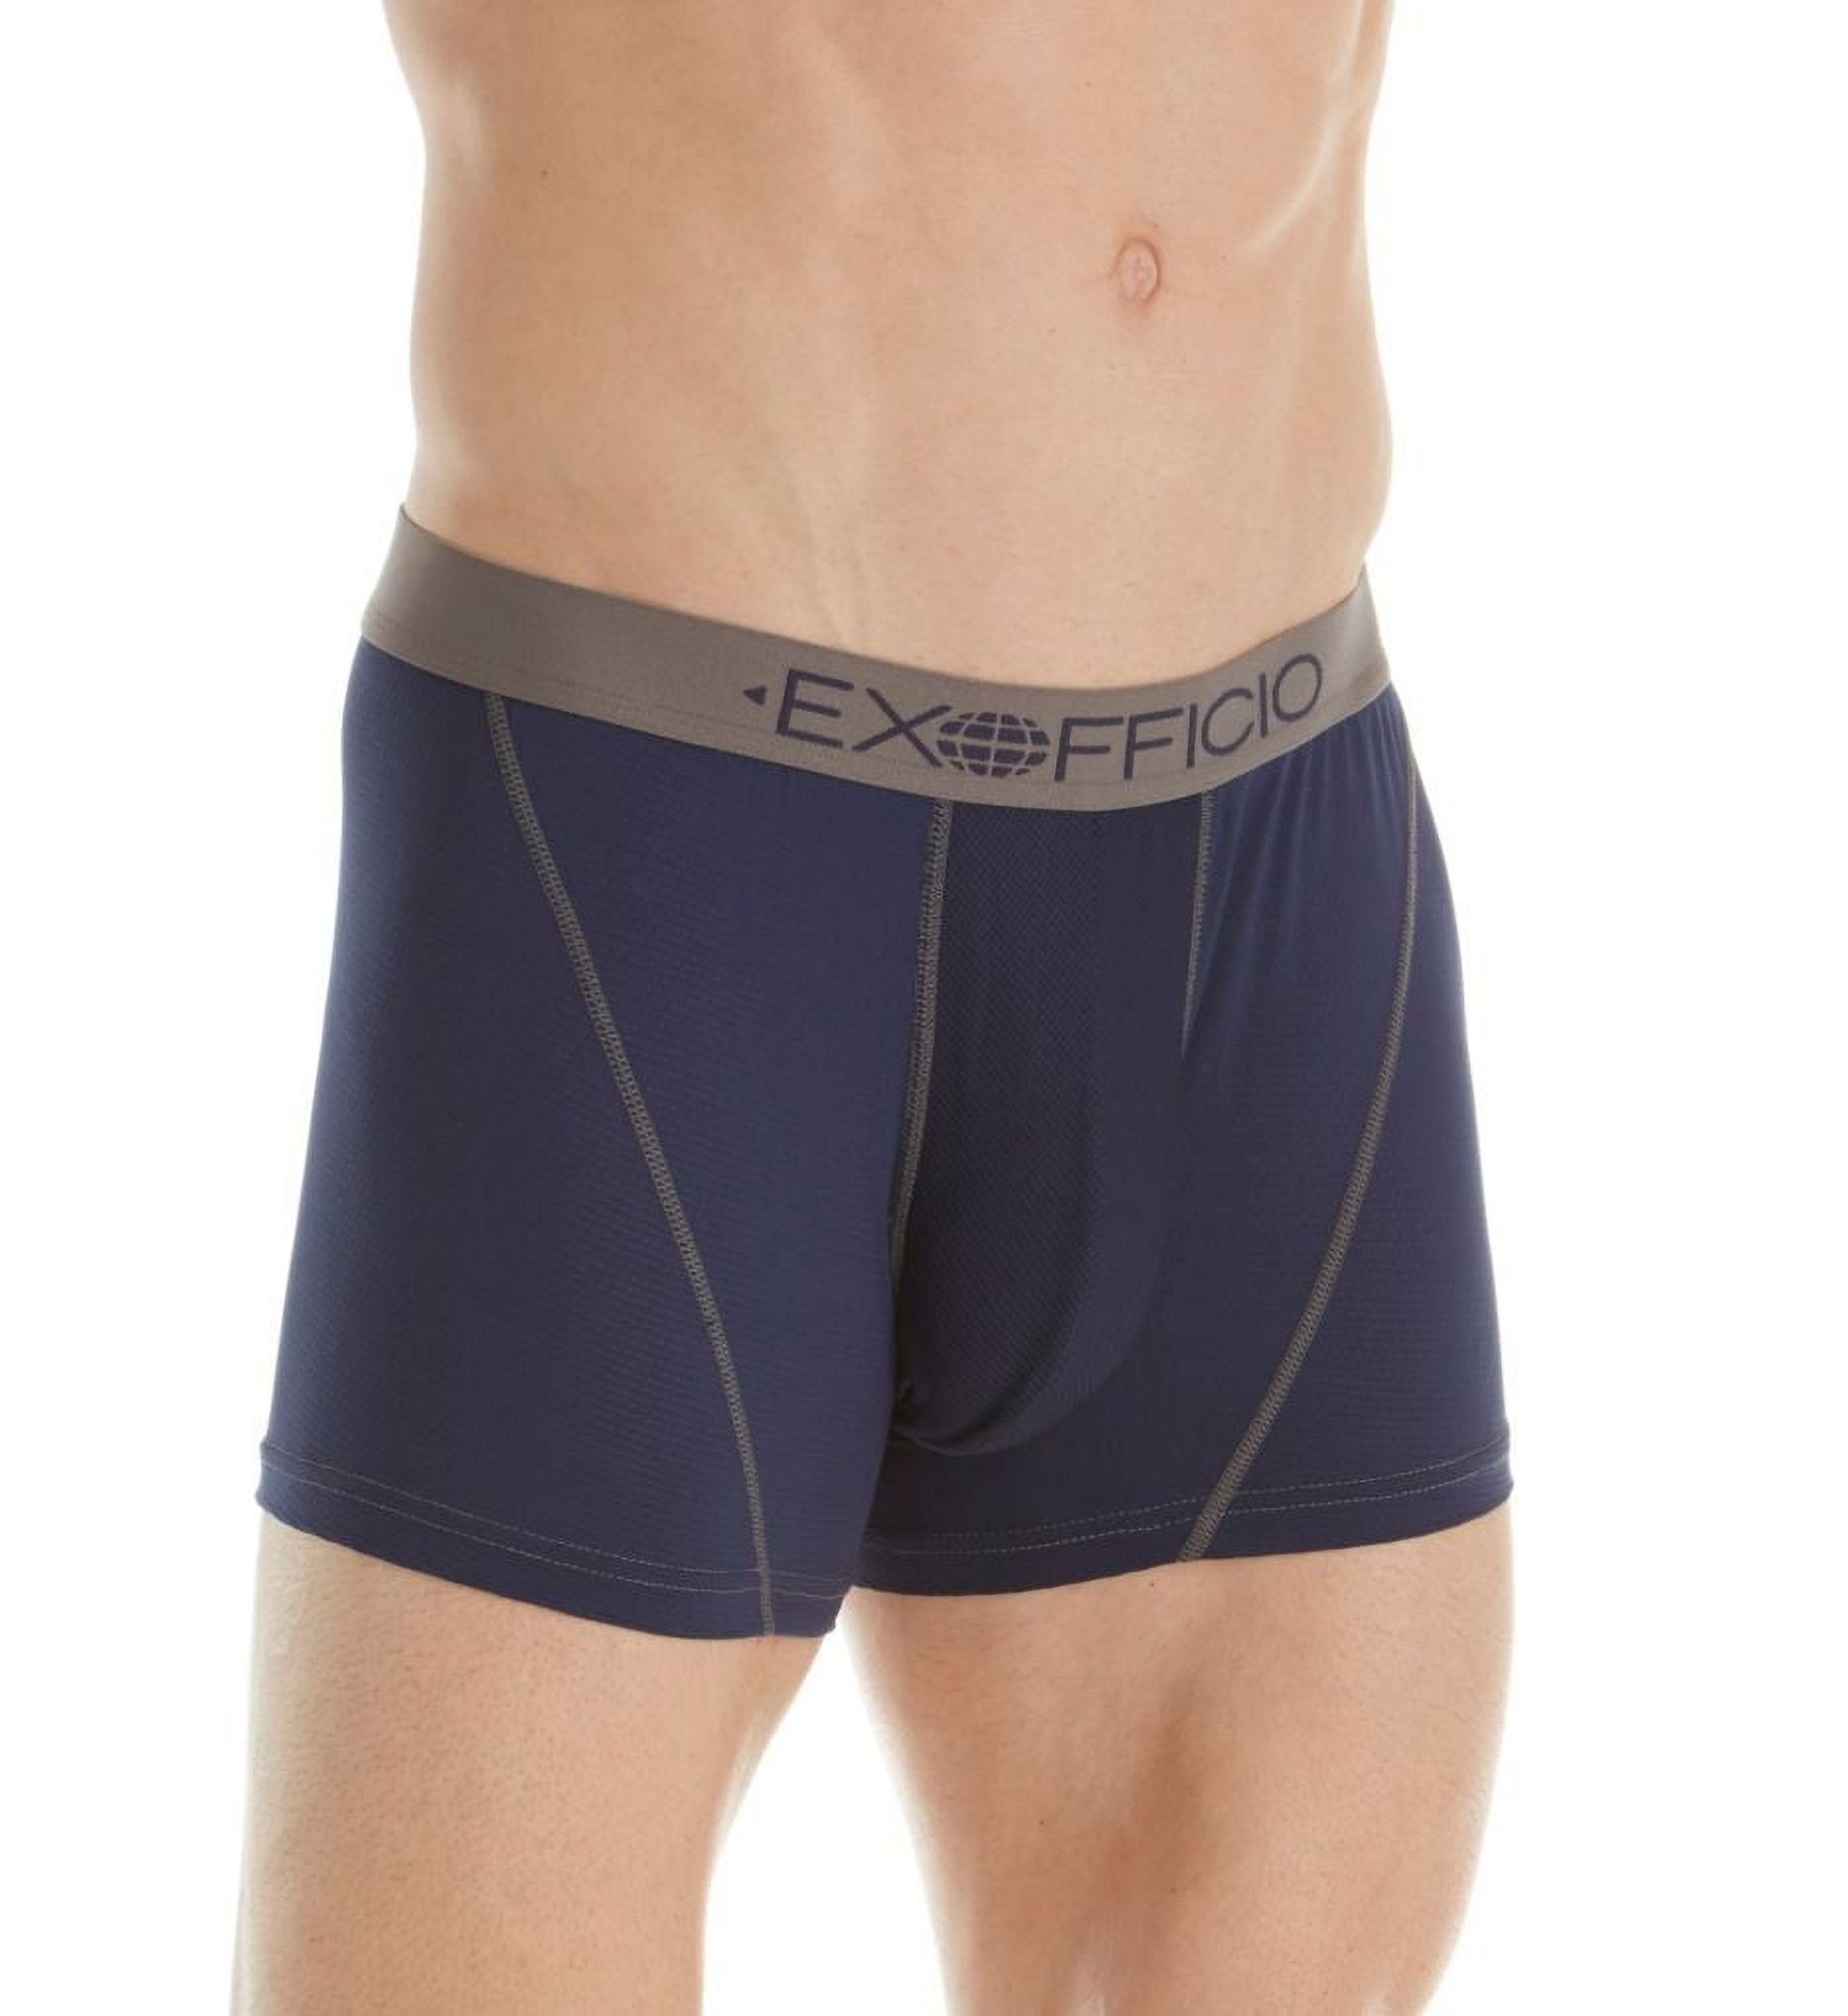 Ex Officio Underwear: Your New Addiction - Pack and Paddle